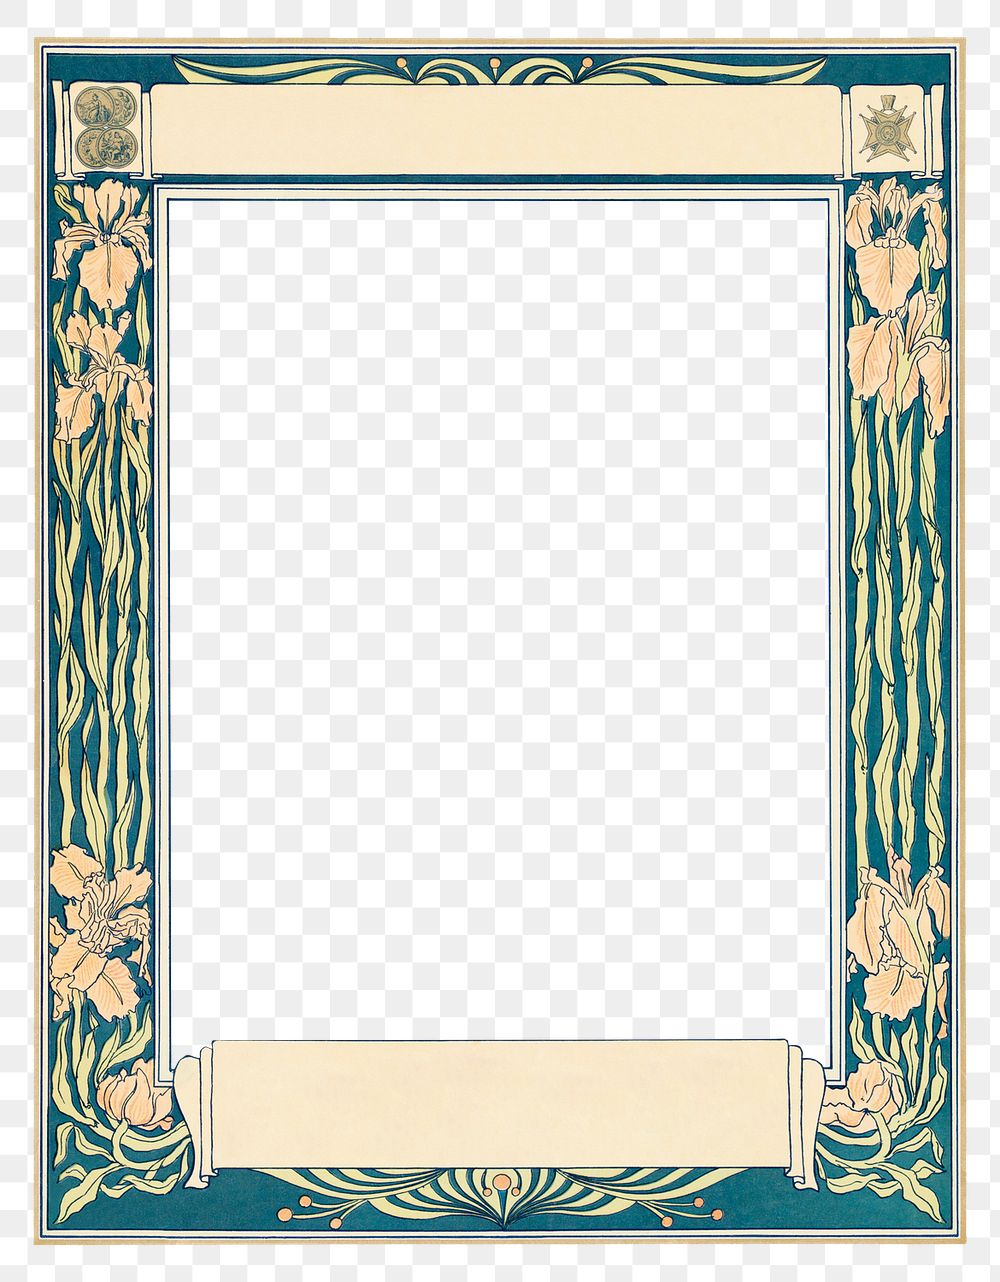 Frame png with vintage green floral border, remixed from the artworks by Johann Georg van Caspel